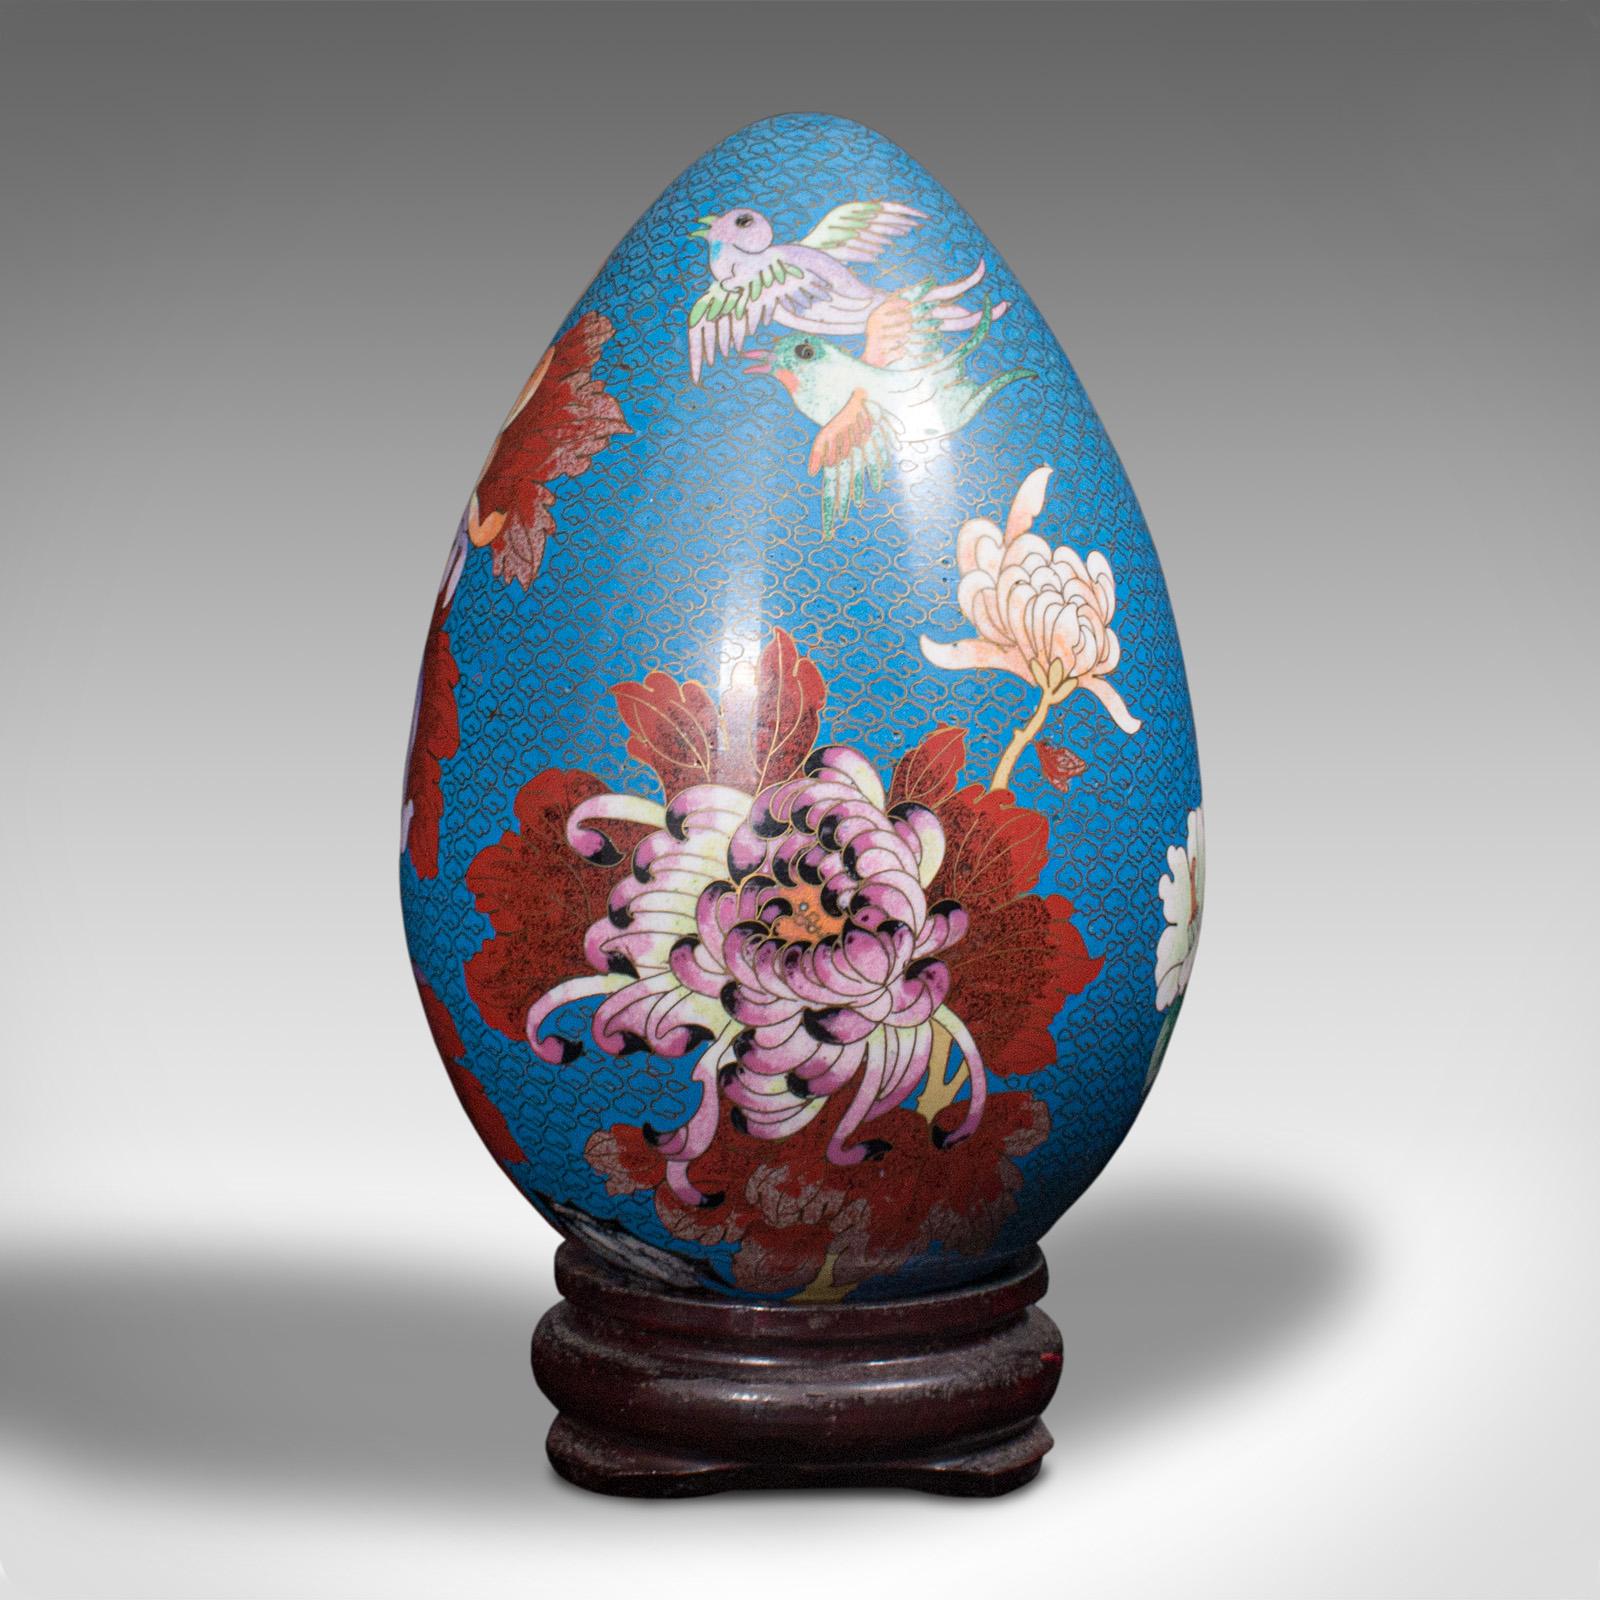 This is a vintage decorative egg. A Chinese, cloisonné ornament, dating to the Art Deco period, circa 1940.

Colourful example of vintage cloisonné and impressive at nearly a foot tall on stand
Displays a desirable aged patina and in good